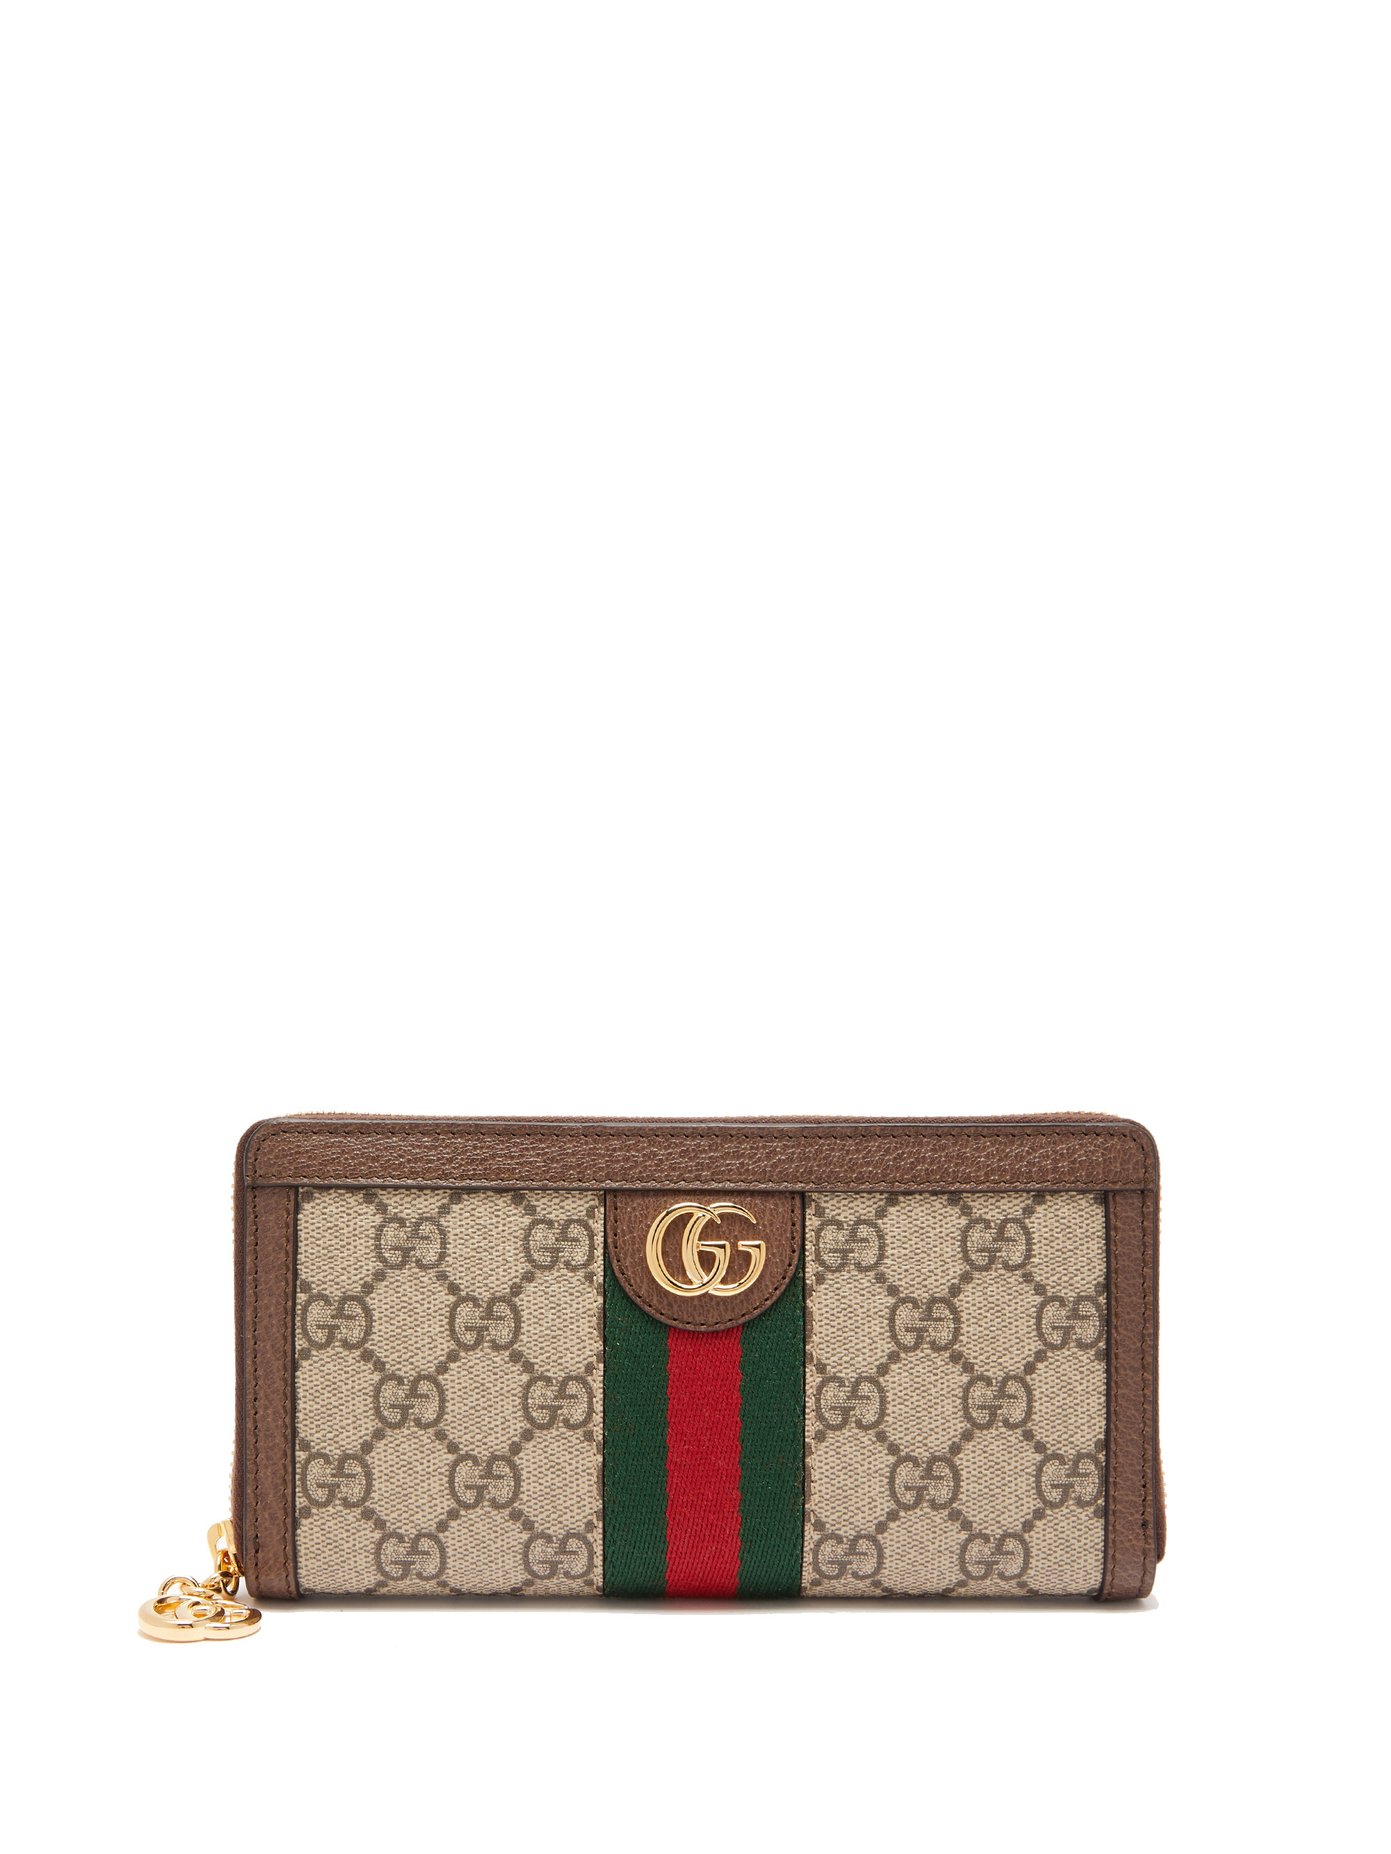 gucci wallet for ladies